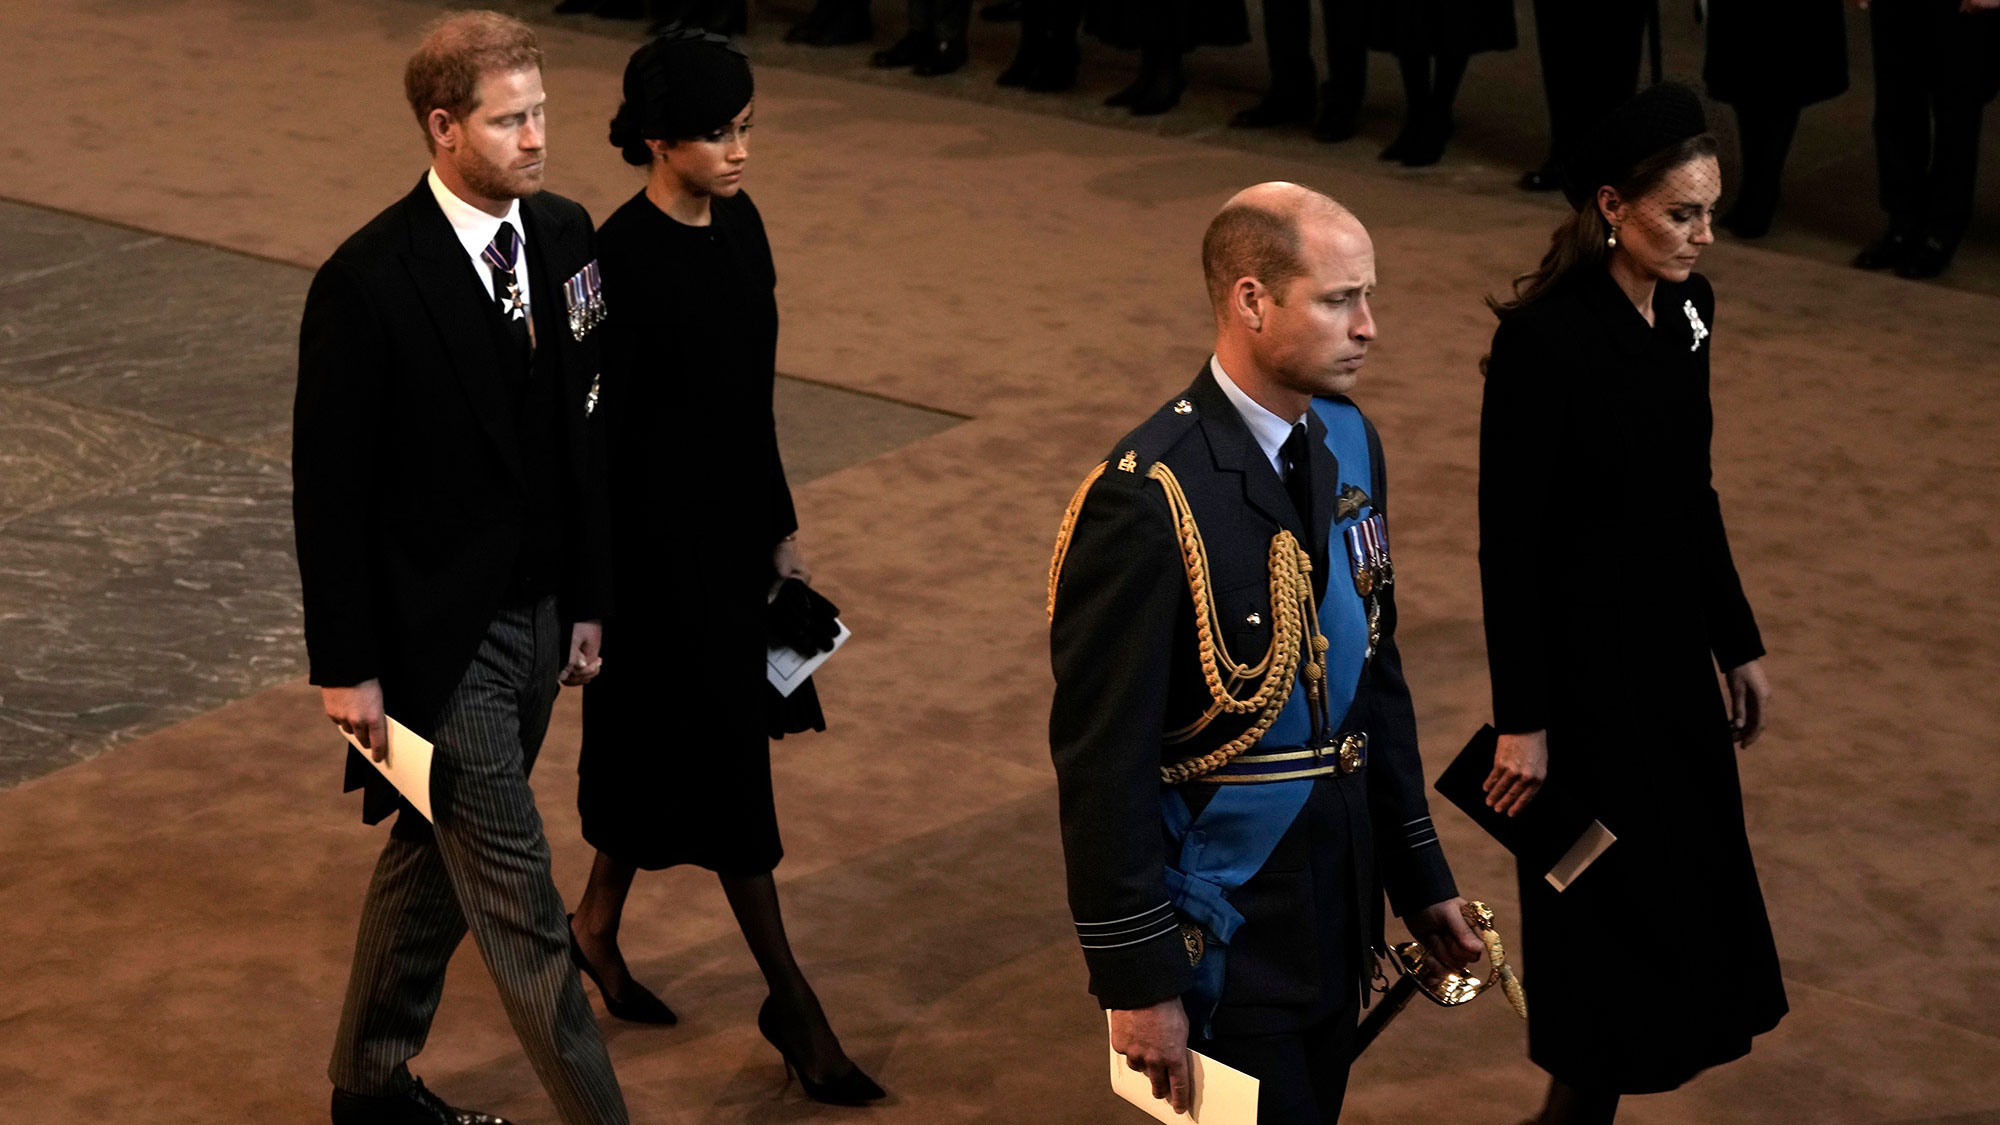 Prince Harry and Meghan, the Duchess of Sussex, walk behind Prince William and Catherine, the Princess of Wales, as they leave Westminster Hall on Wednesday.